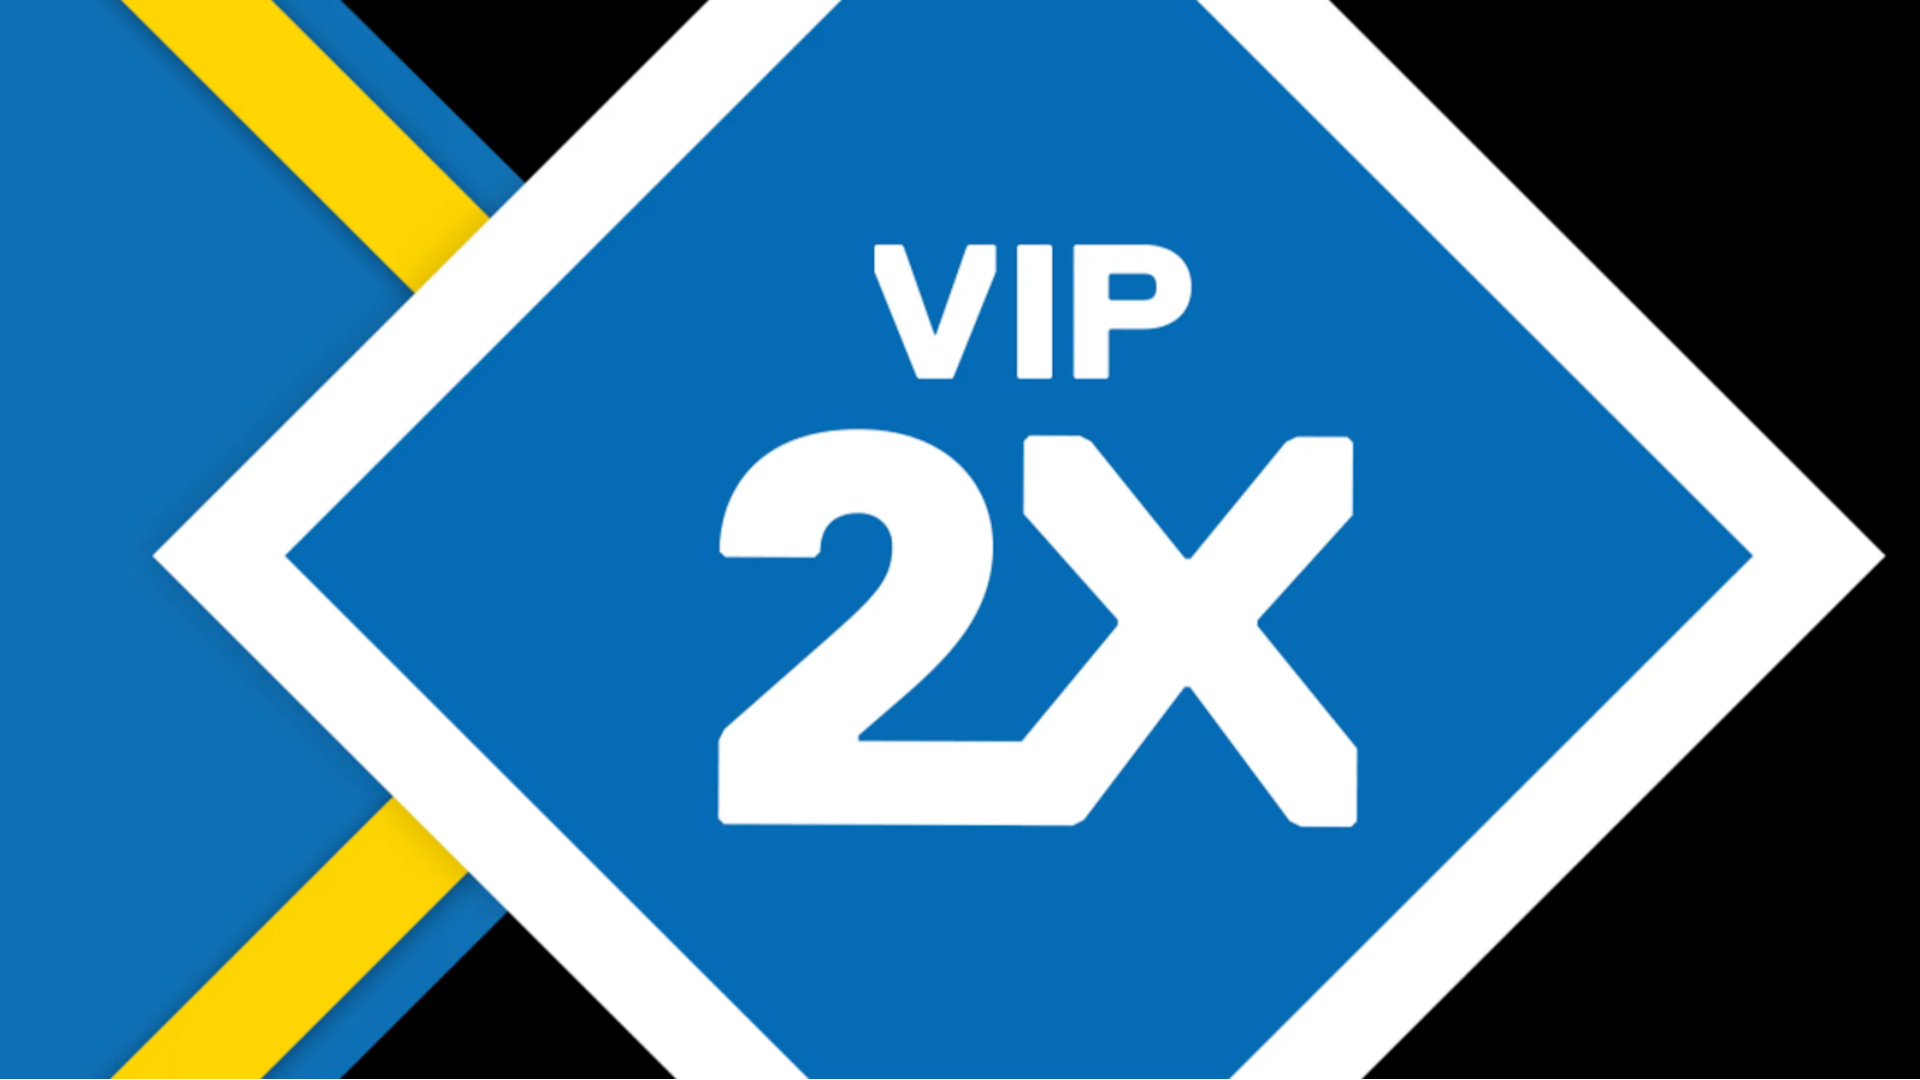 The LEGO VIP Double Points logo is shown.